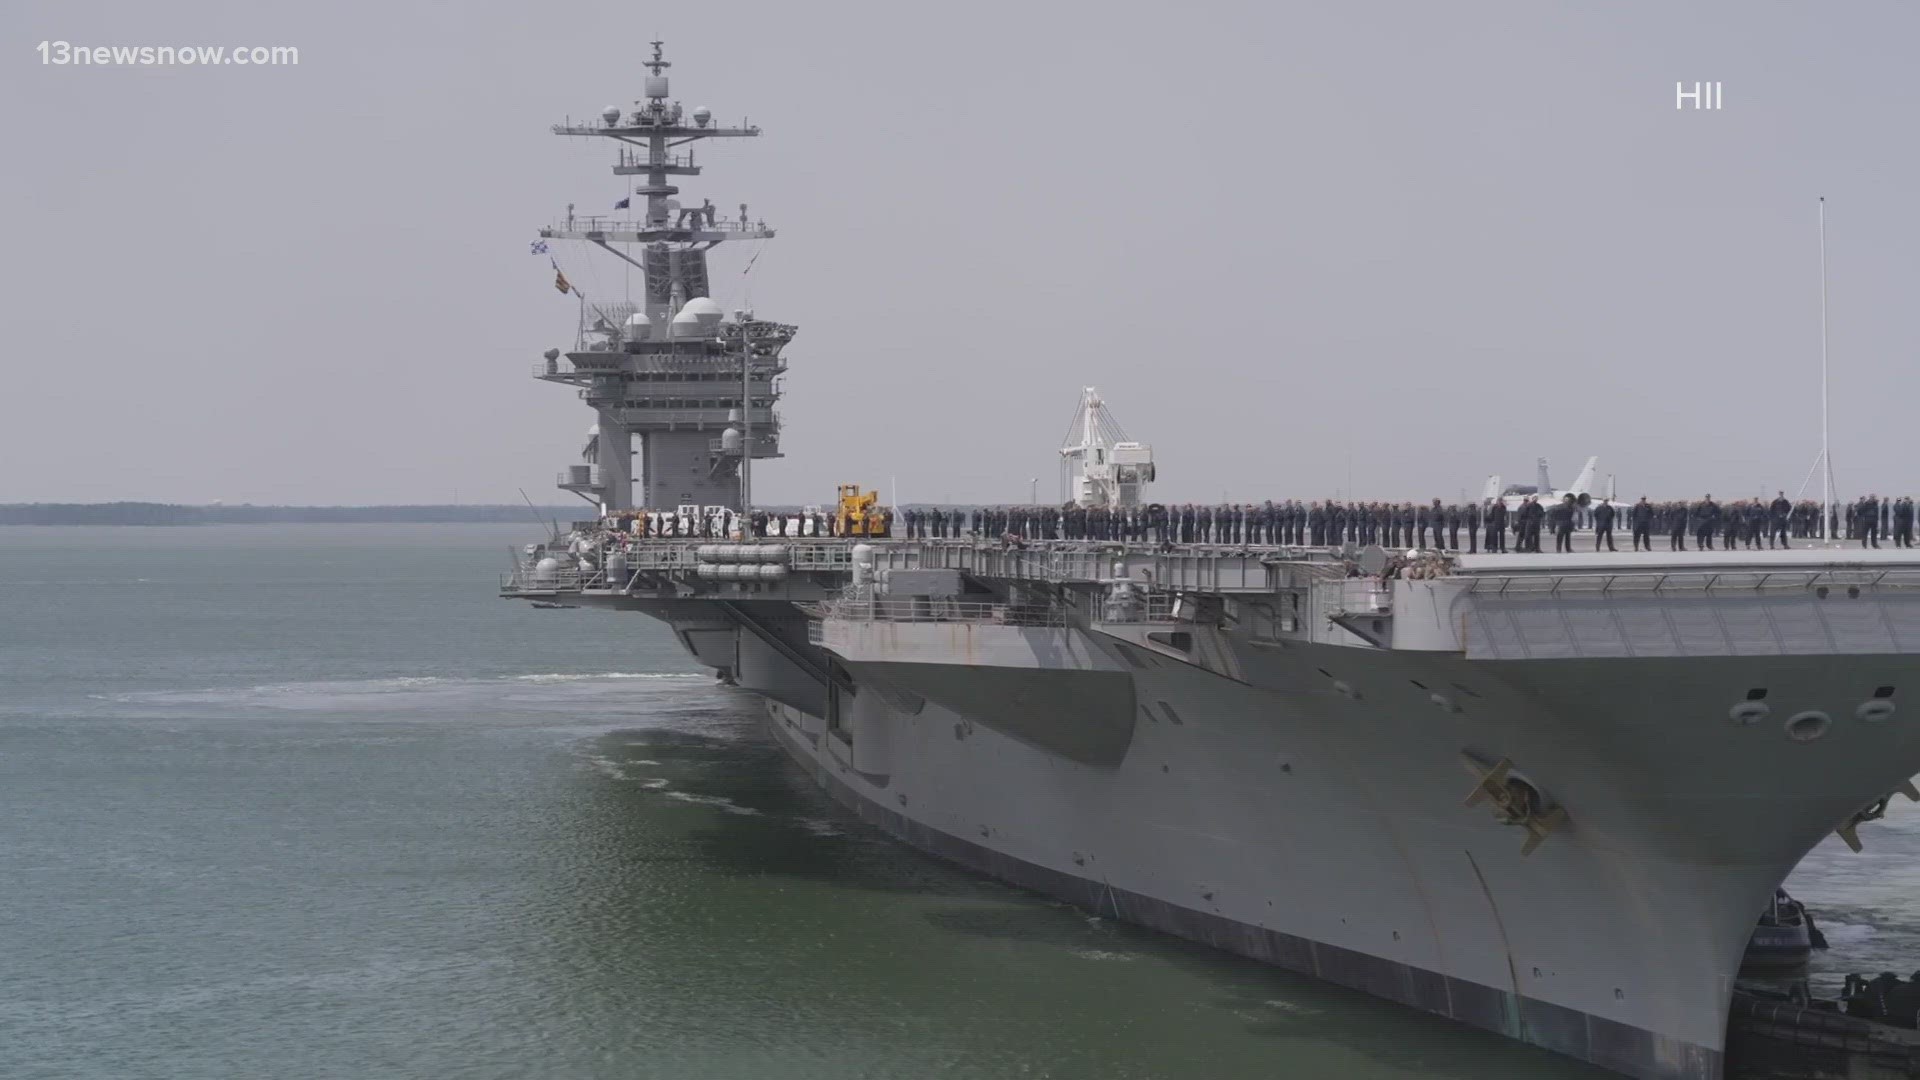 The aircraft carrier has been at Newport News Shipbuilding for its mid-life refueling and complex overhaul and nuclear refueling in 2017.